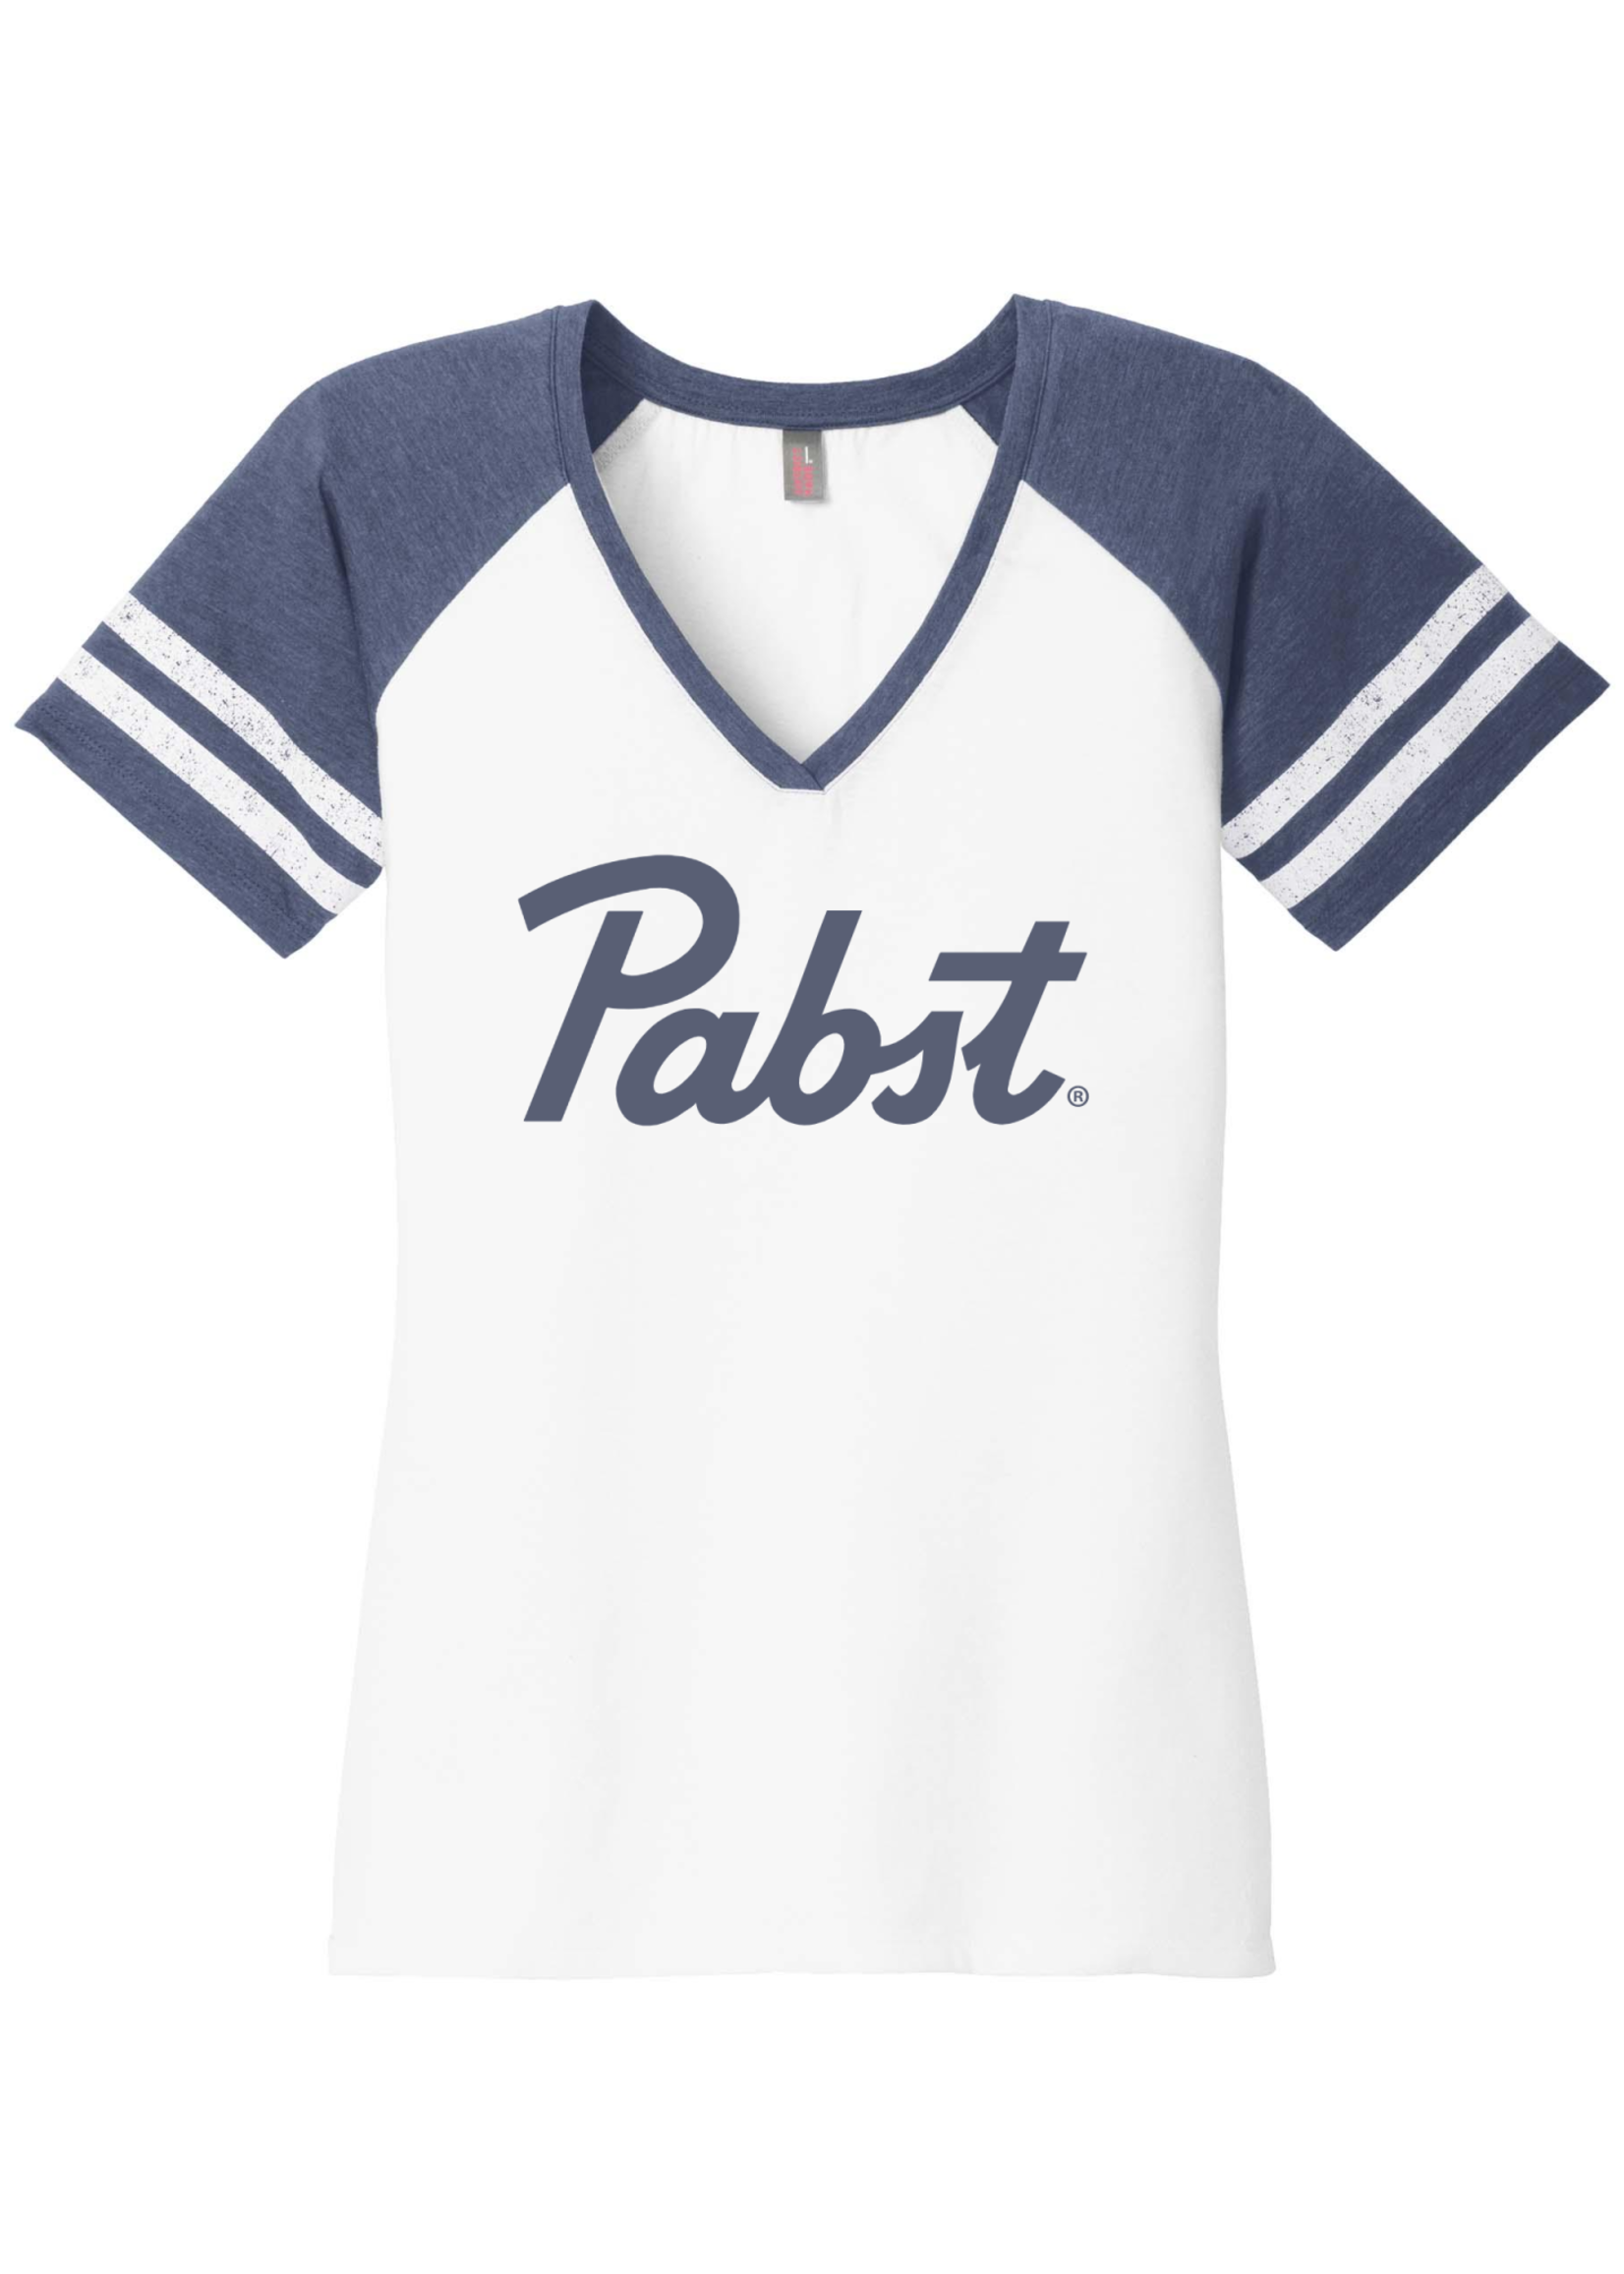 Pabst Women's Pabst Game Day Tee